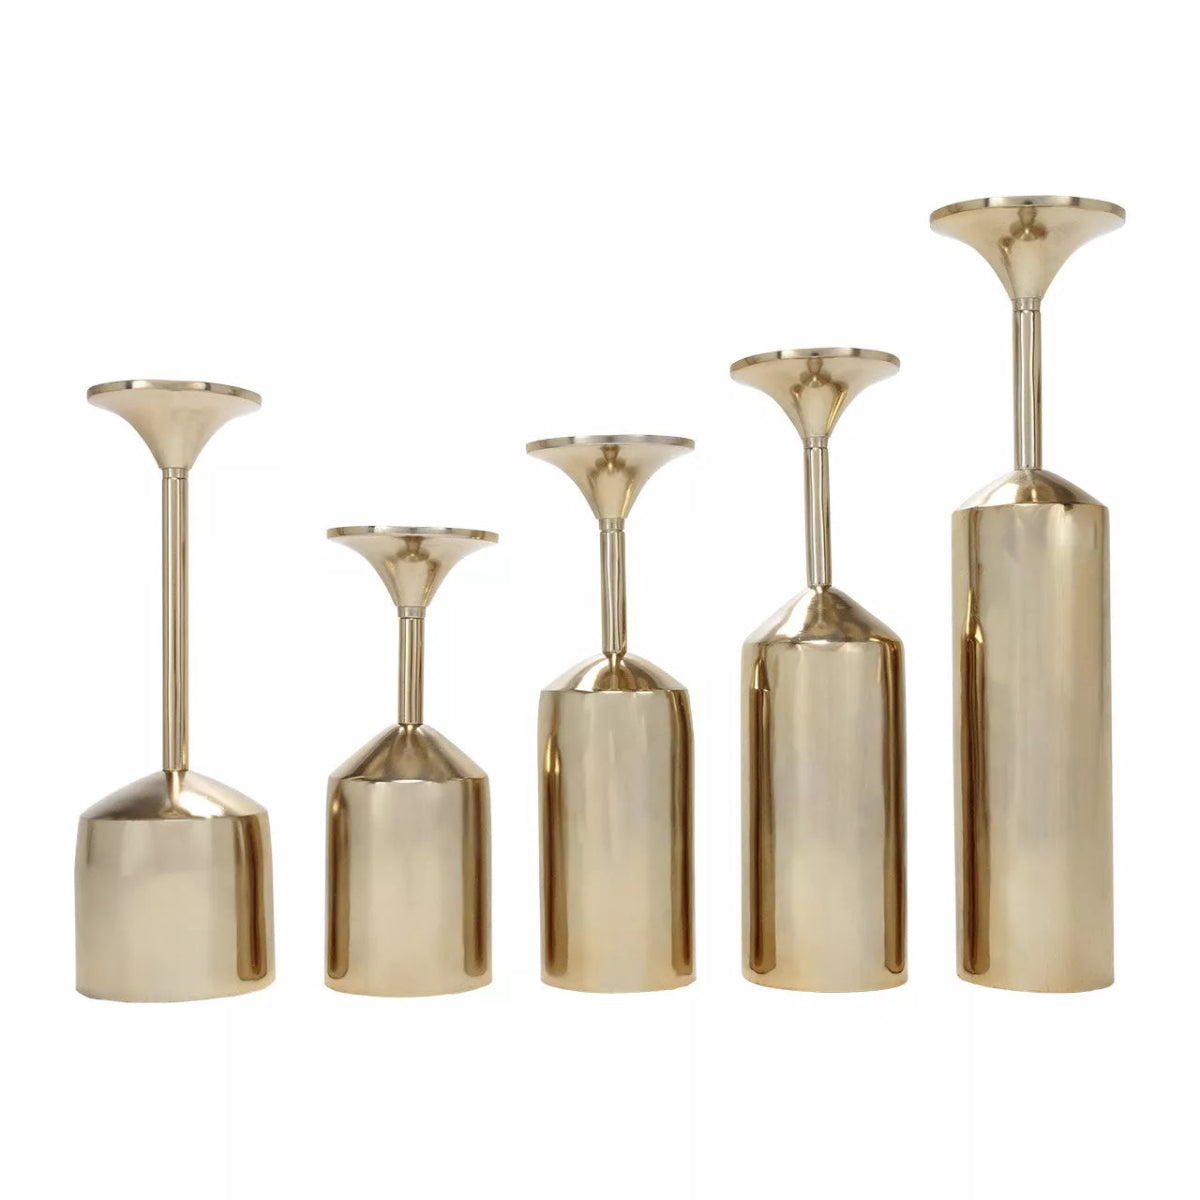 Marquis Candle Holder - Set of 5